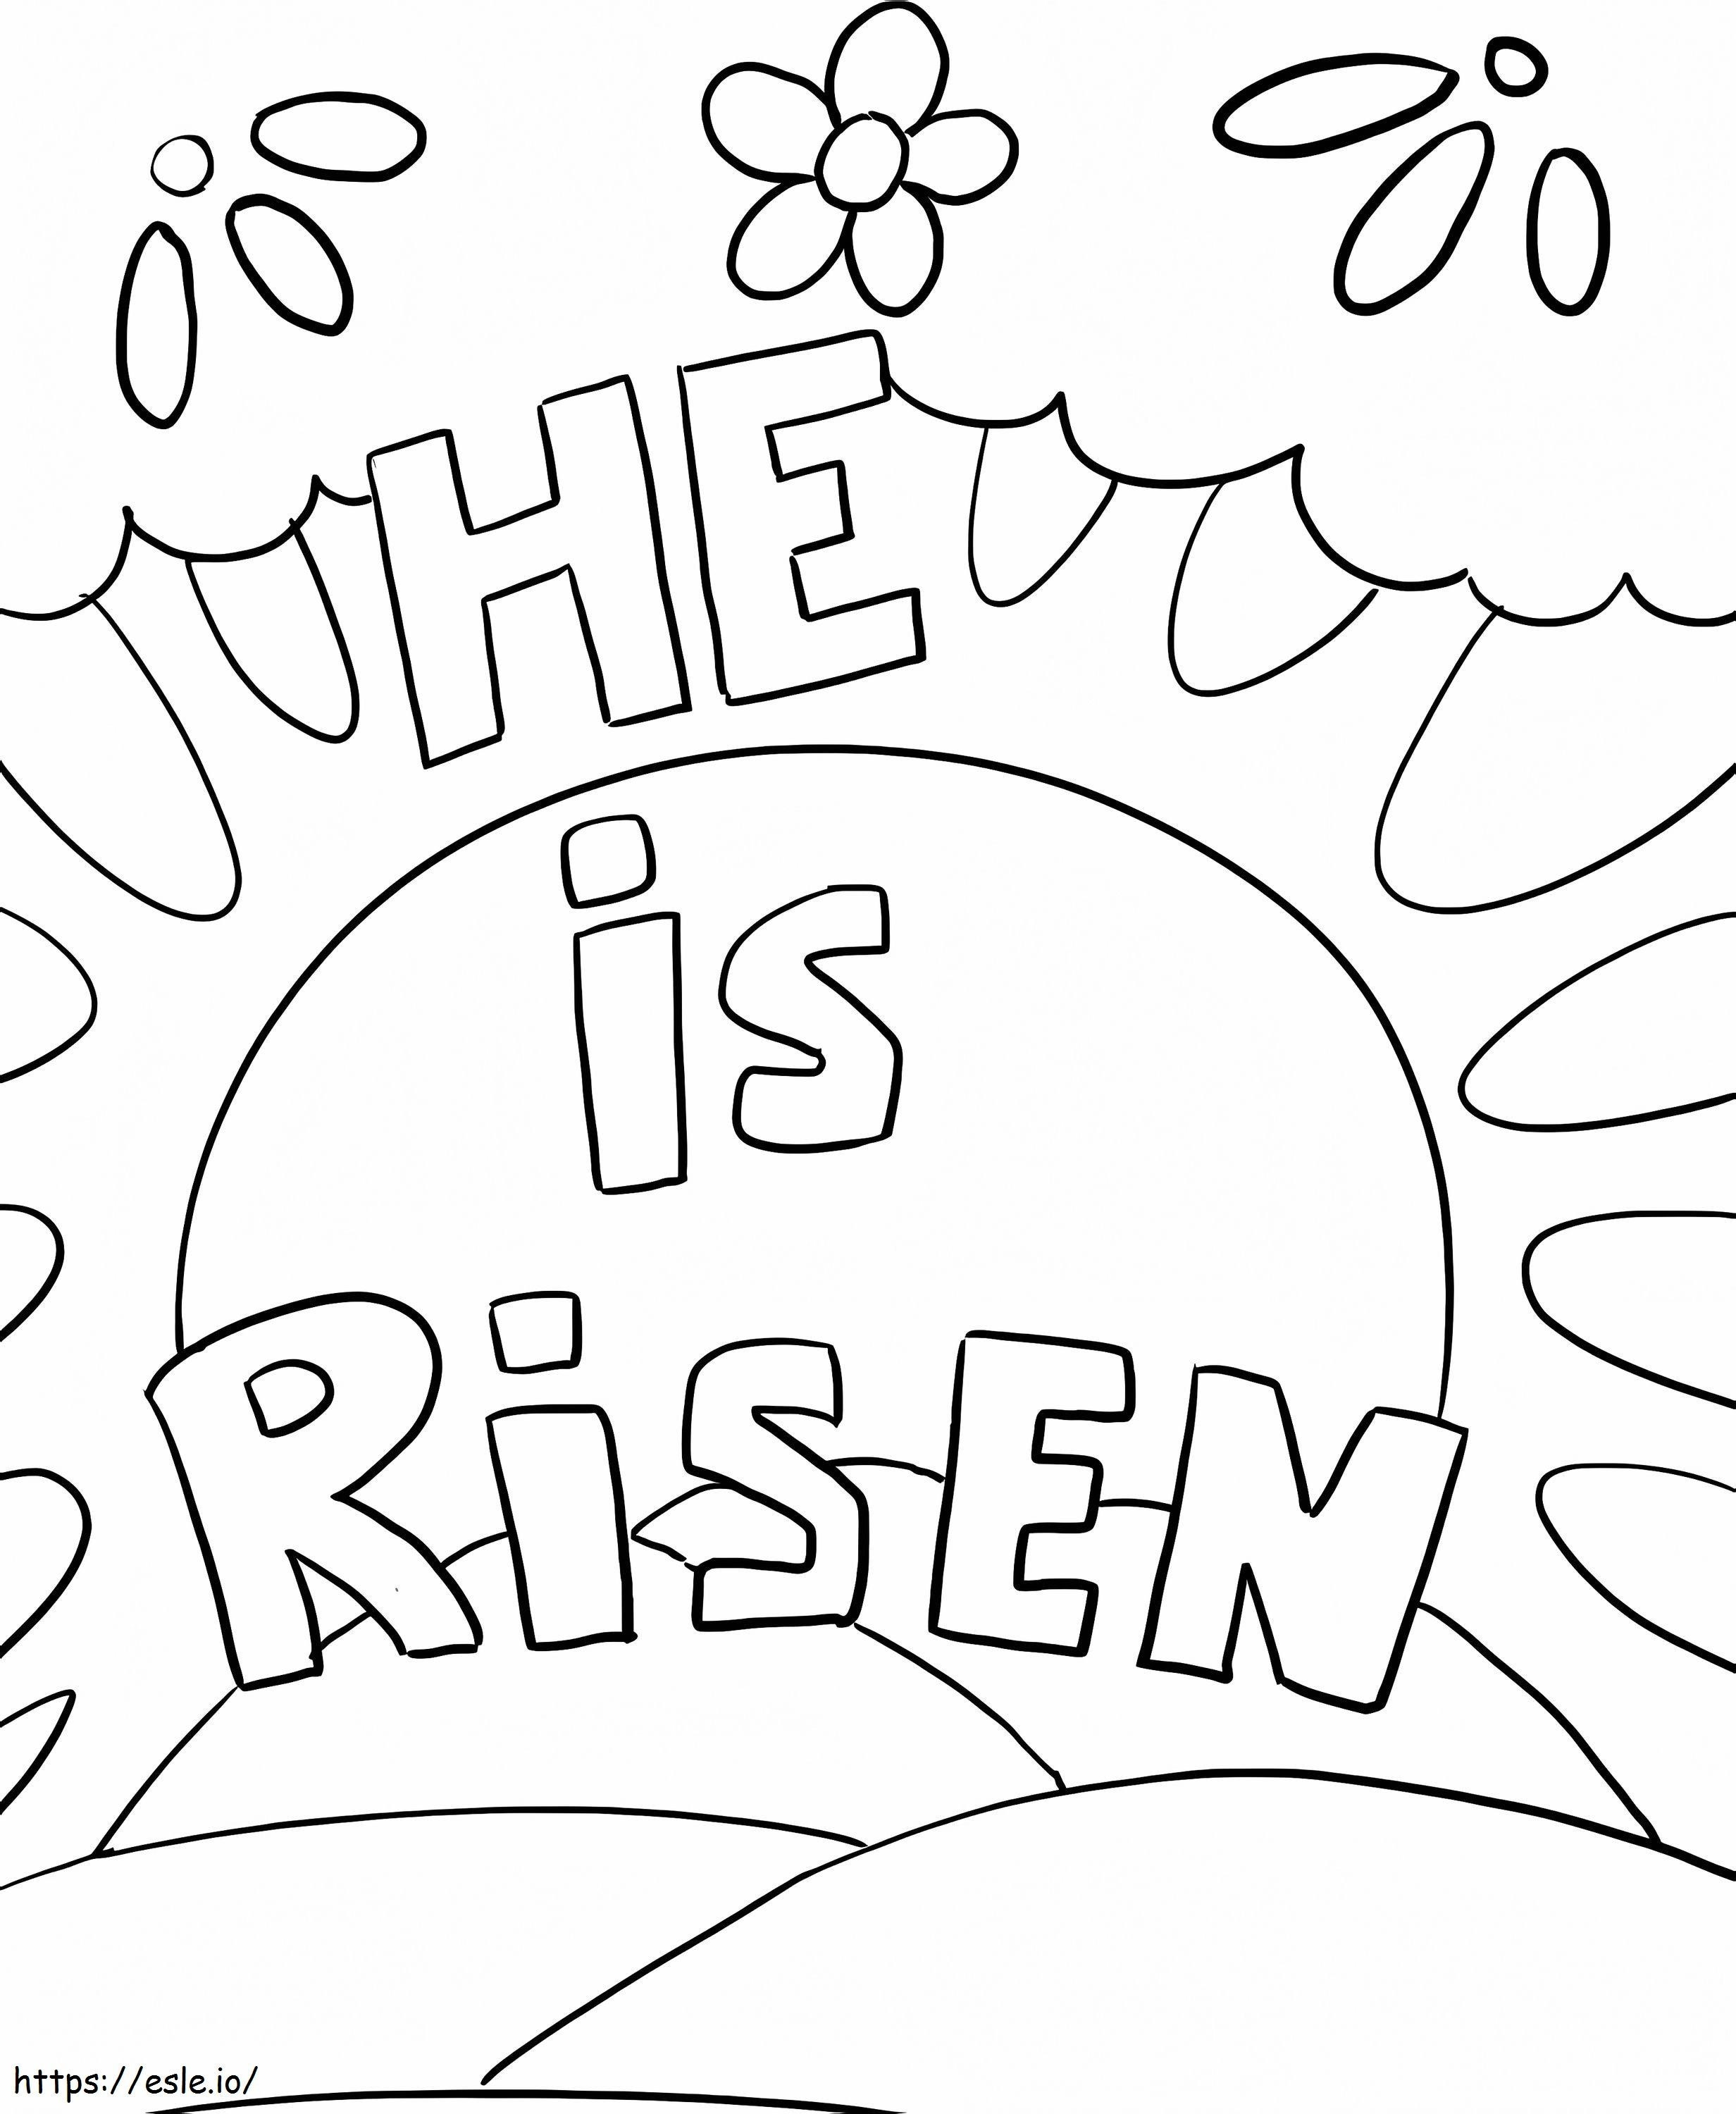 He Is Risen 1 coloring page